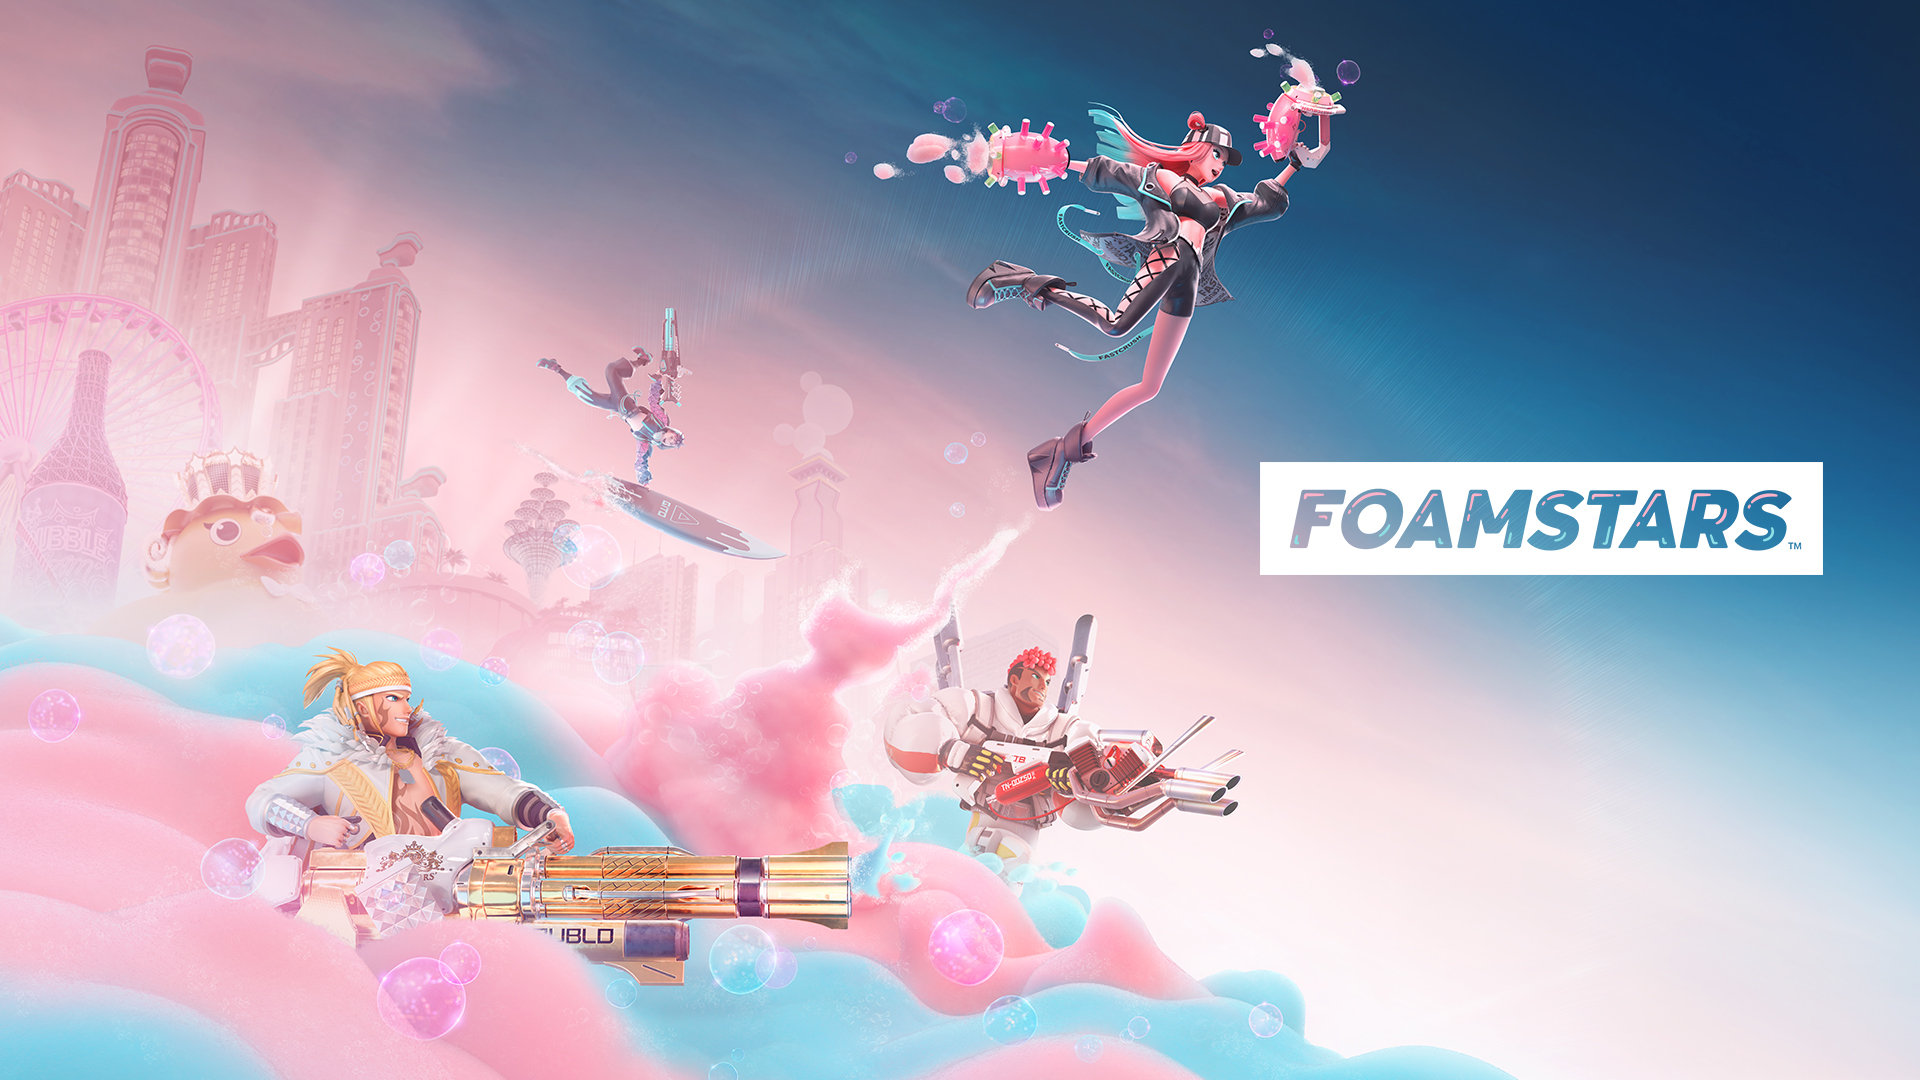 SQUARE ENIX ANNOUNCES FOAMSTARS, A VIBRANT NEW ONLINE MULTIPLAYER SHOOTER FOR PlayStation 5 AND PlayStation 4